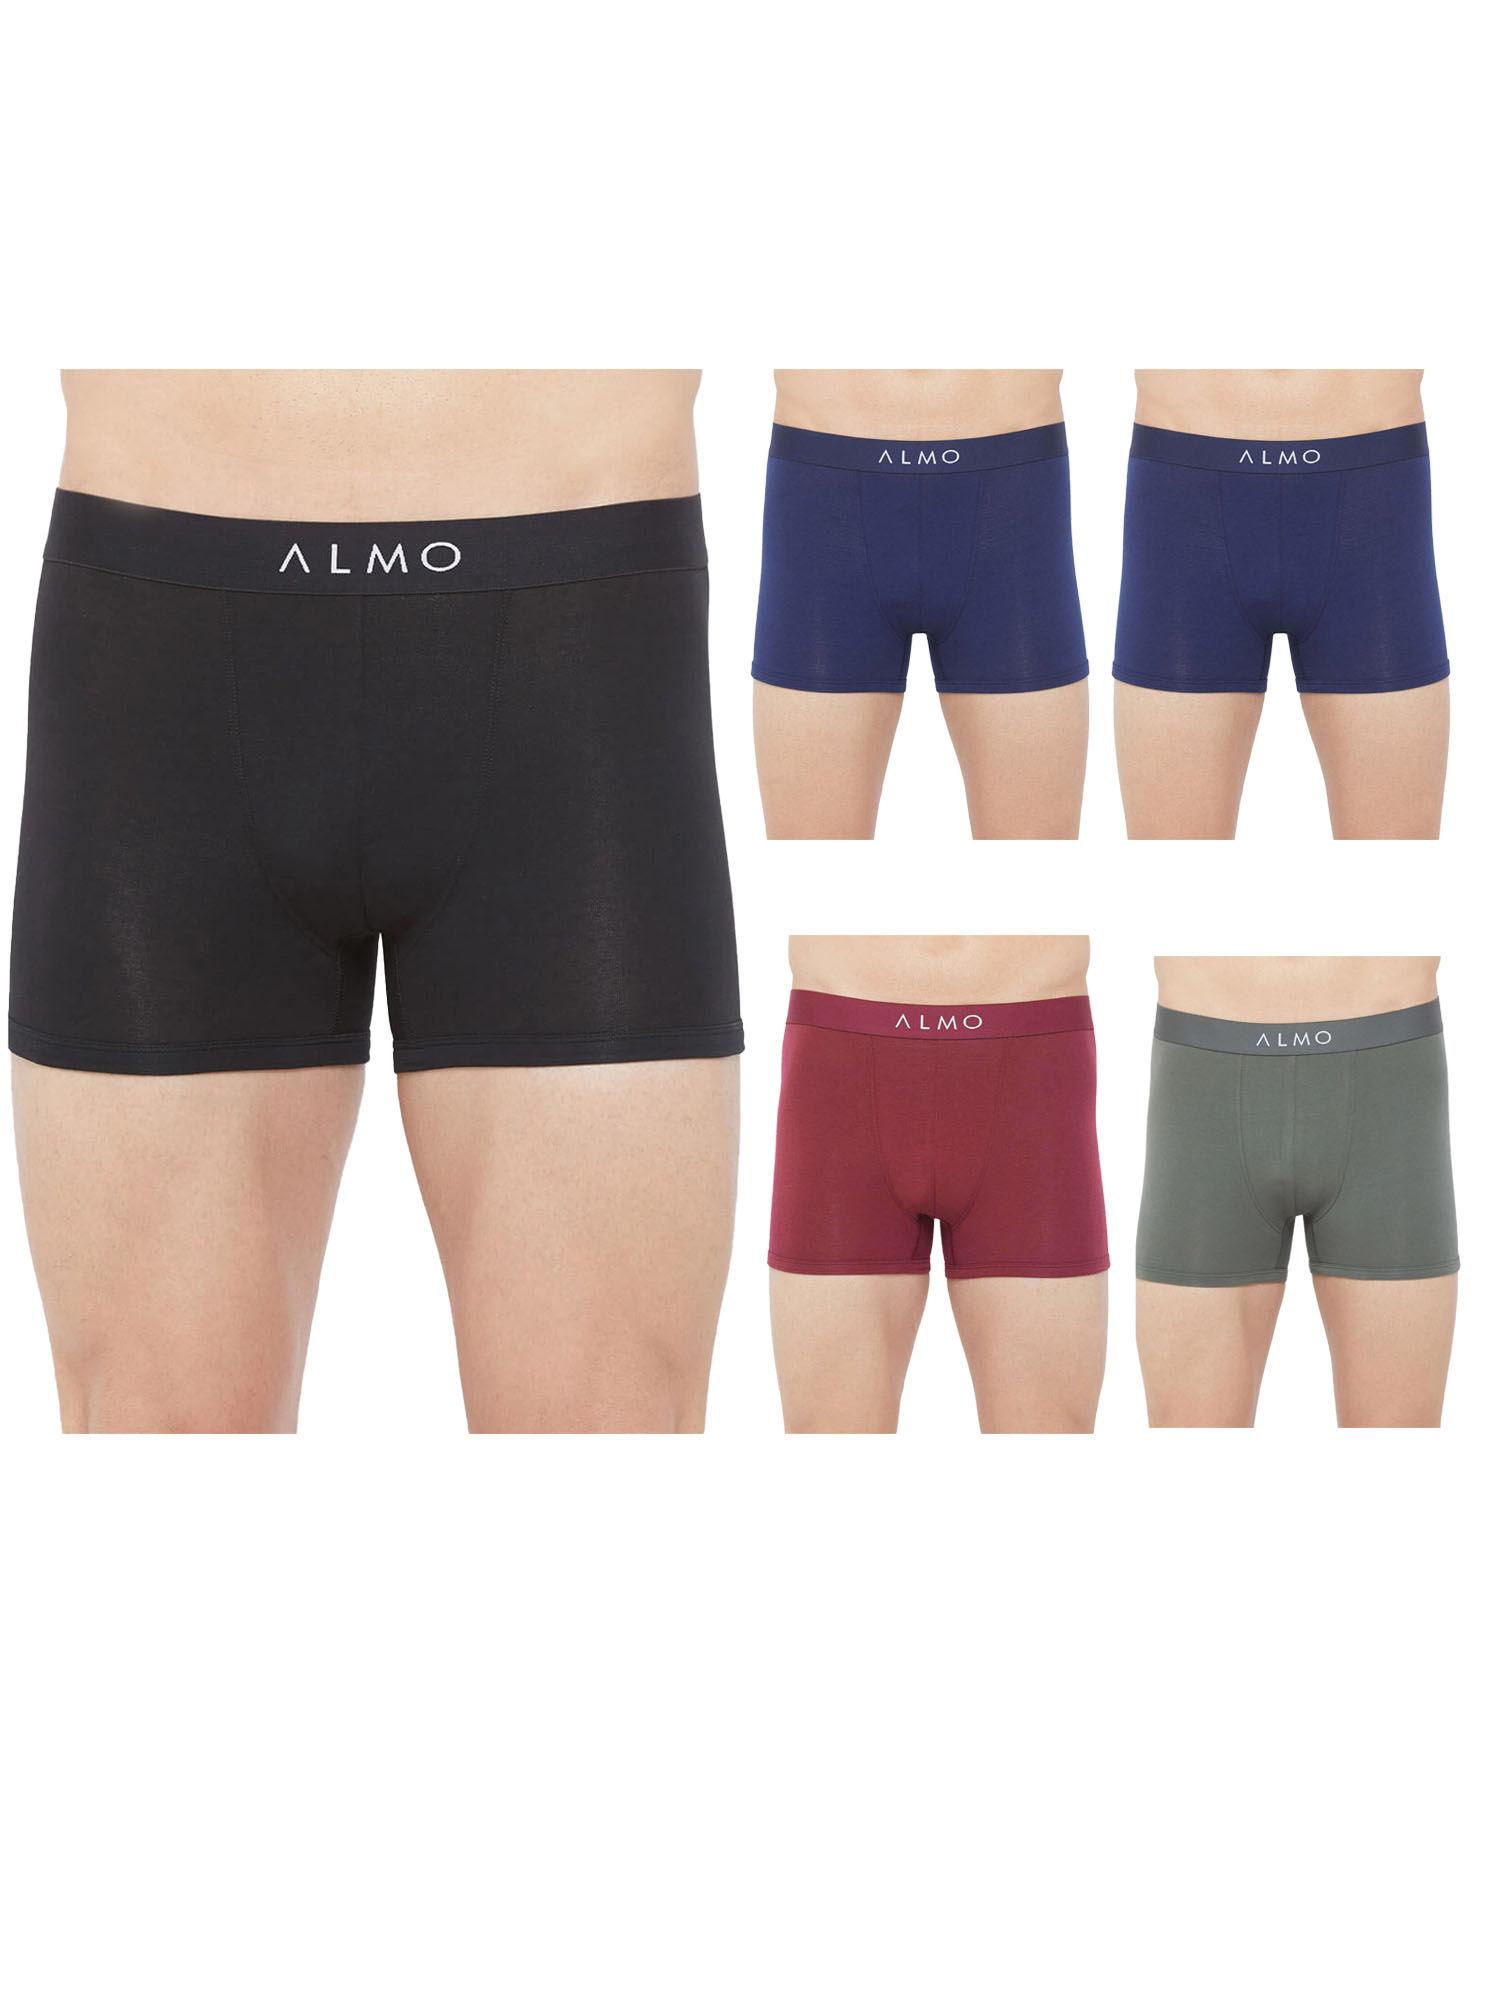 rico organic cotton trunk (pack of 5) - black - navy - navy - wine - army green